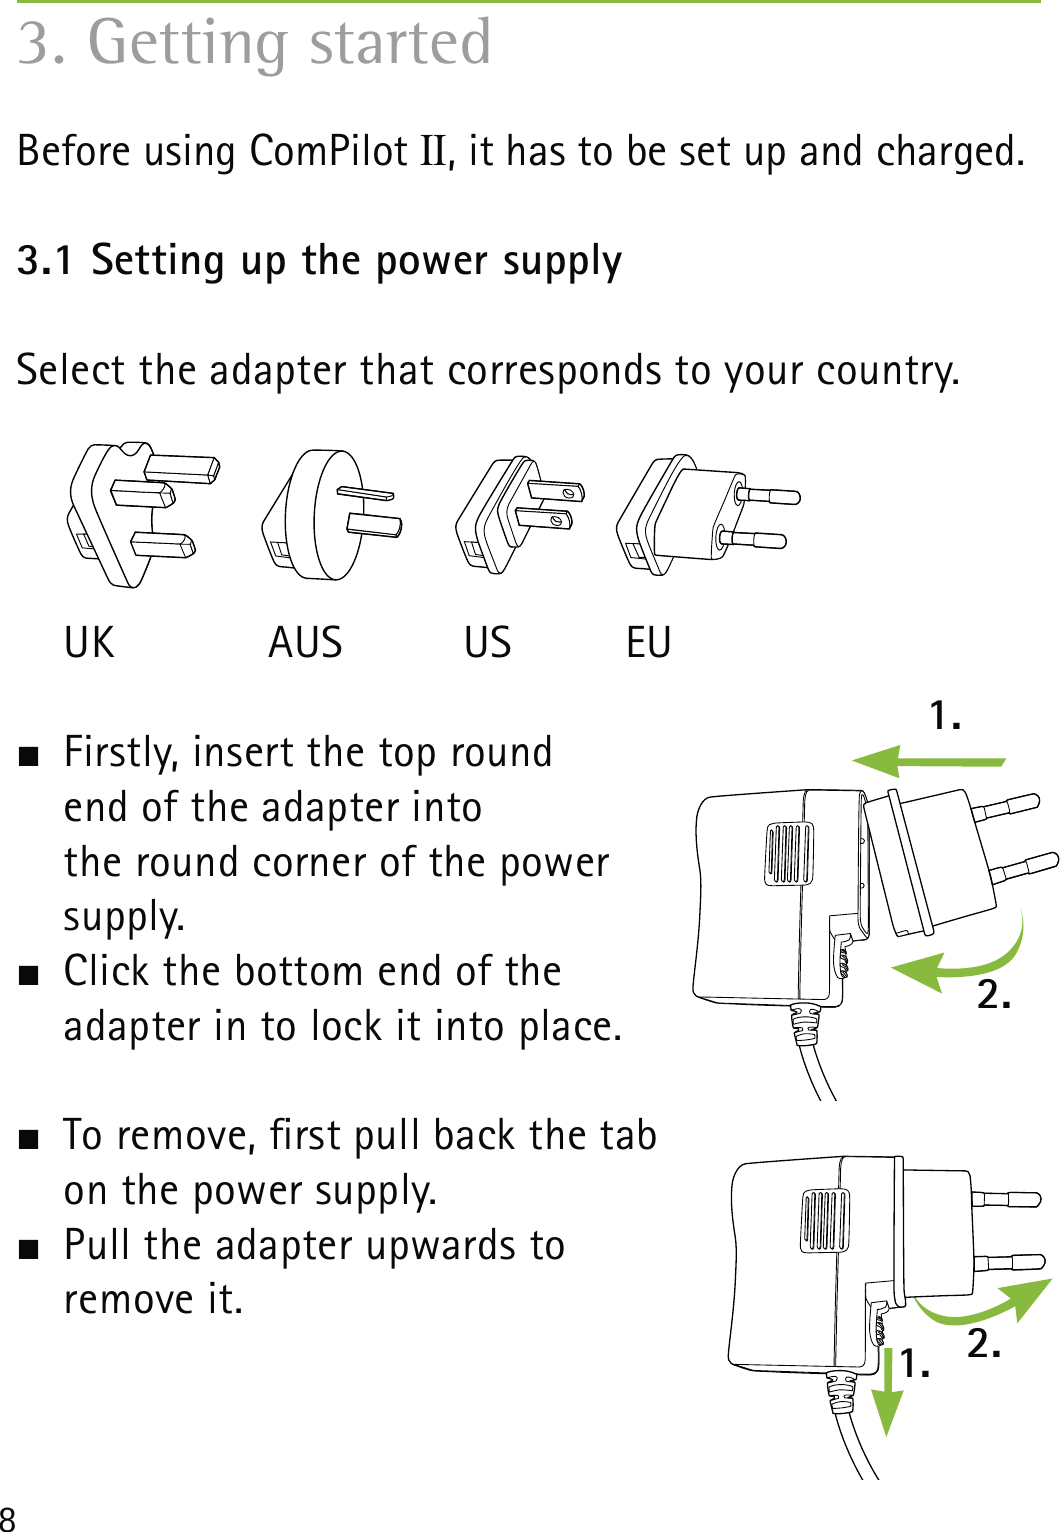 83. Getting startedBefore using ComPilot II, it has to be set up and charged. 3.1 Setting up the power supply Select the adapter that corresponds to your country. UK  AUS  US  EU  Firstly, insert the top round  end of the adapter into  the round corner of the power  supply.   Click the bottom end of the  adapter in to lock it into place.   To remove, rst pull back the tab  on the power supply.  Pull the adapter upwards to  remove it. 1.1. 2.2.